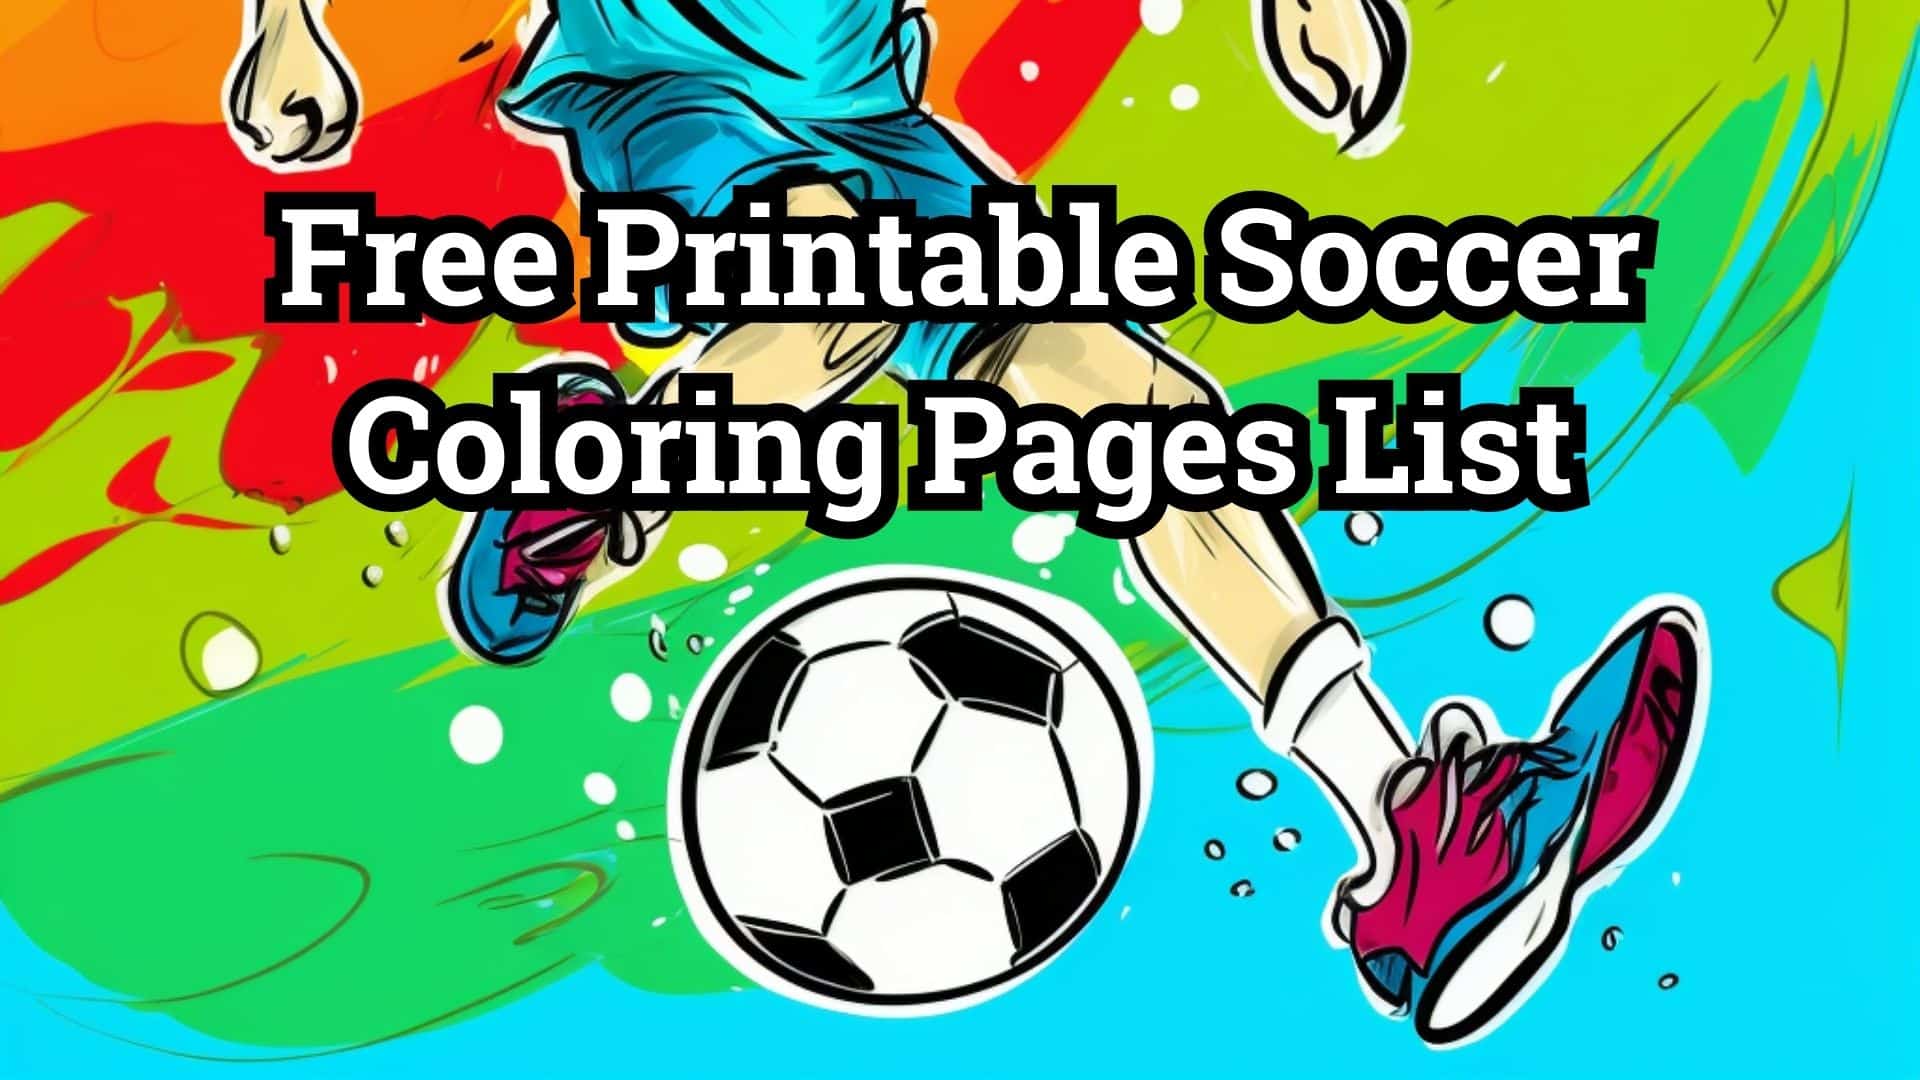 Free Printable Soccer Coloring Pages List